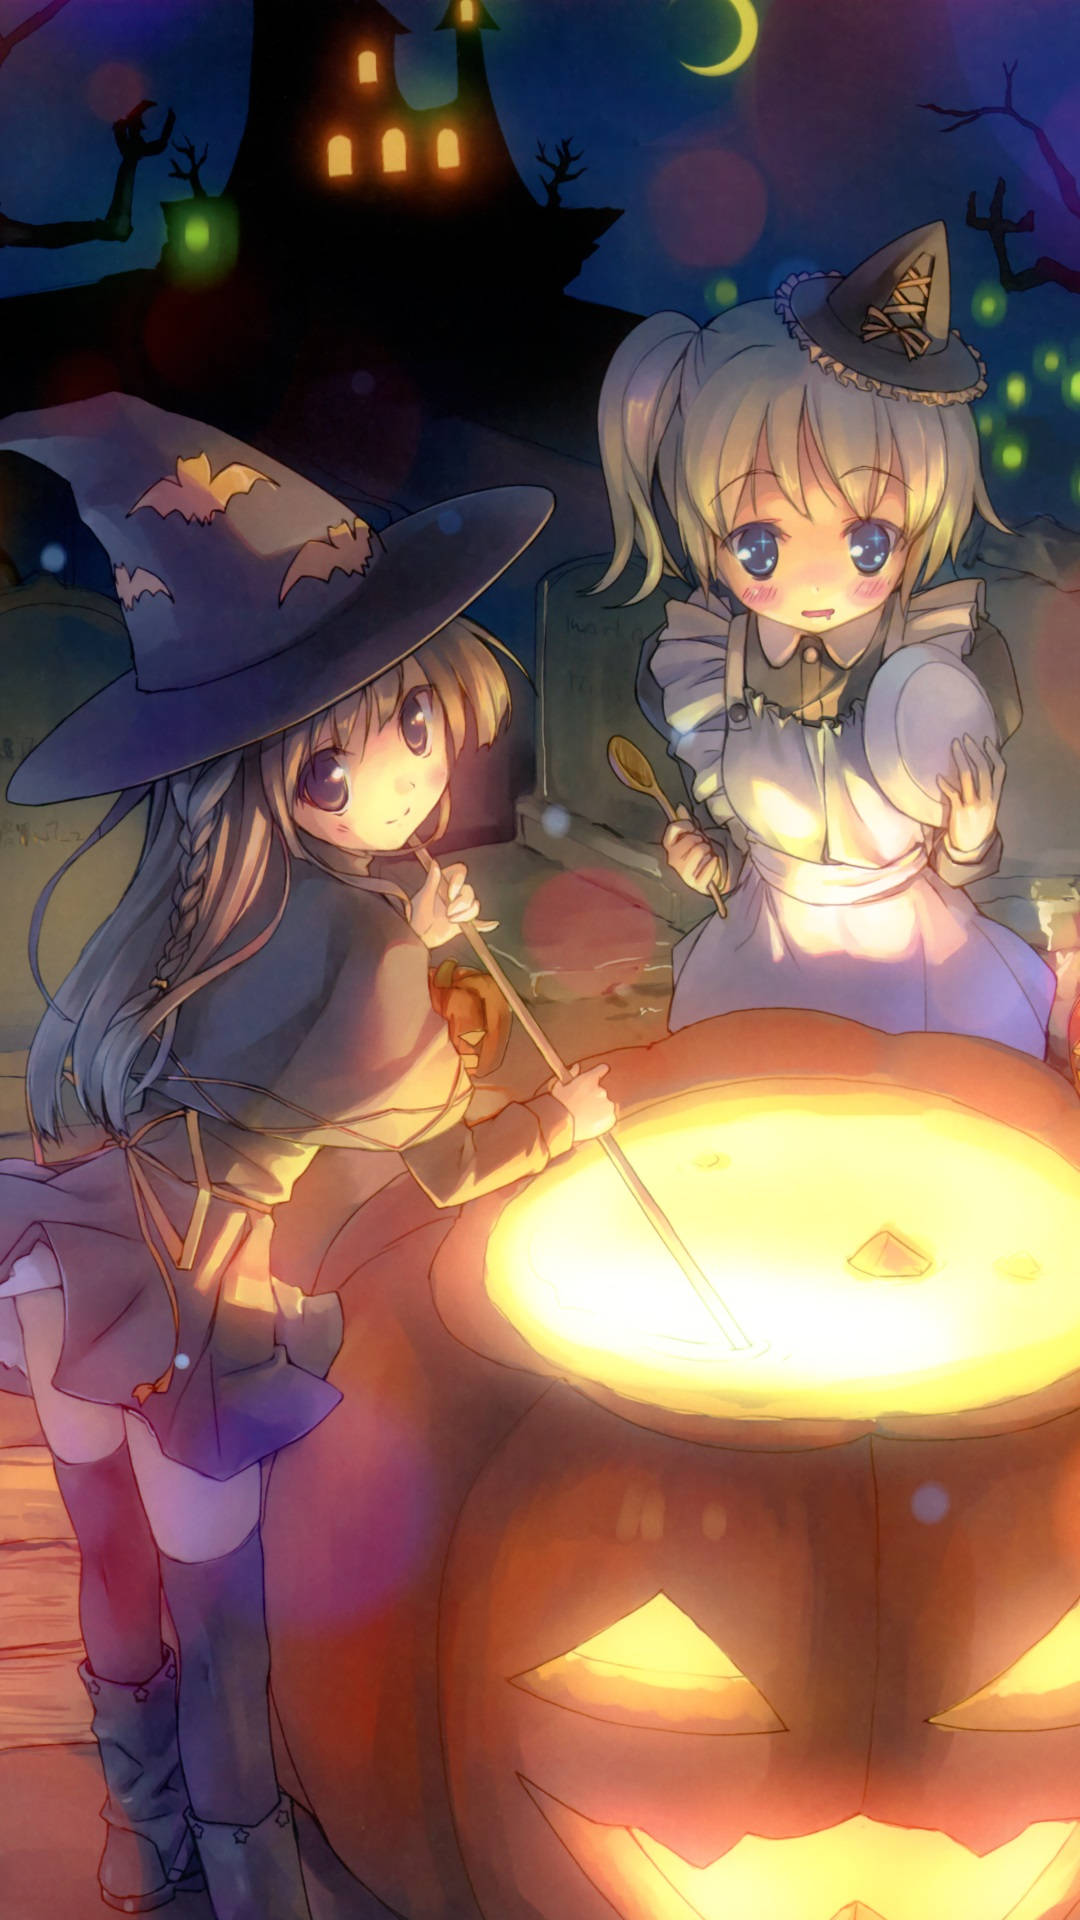 Trick or treat? Get ready for Halloween with this festive Anime twist! Wallpaper